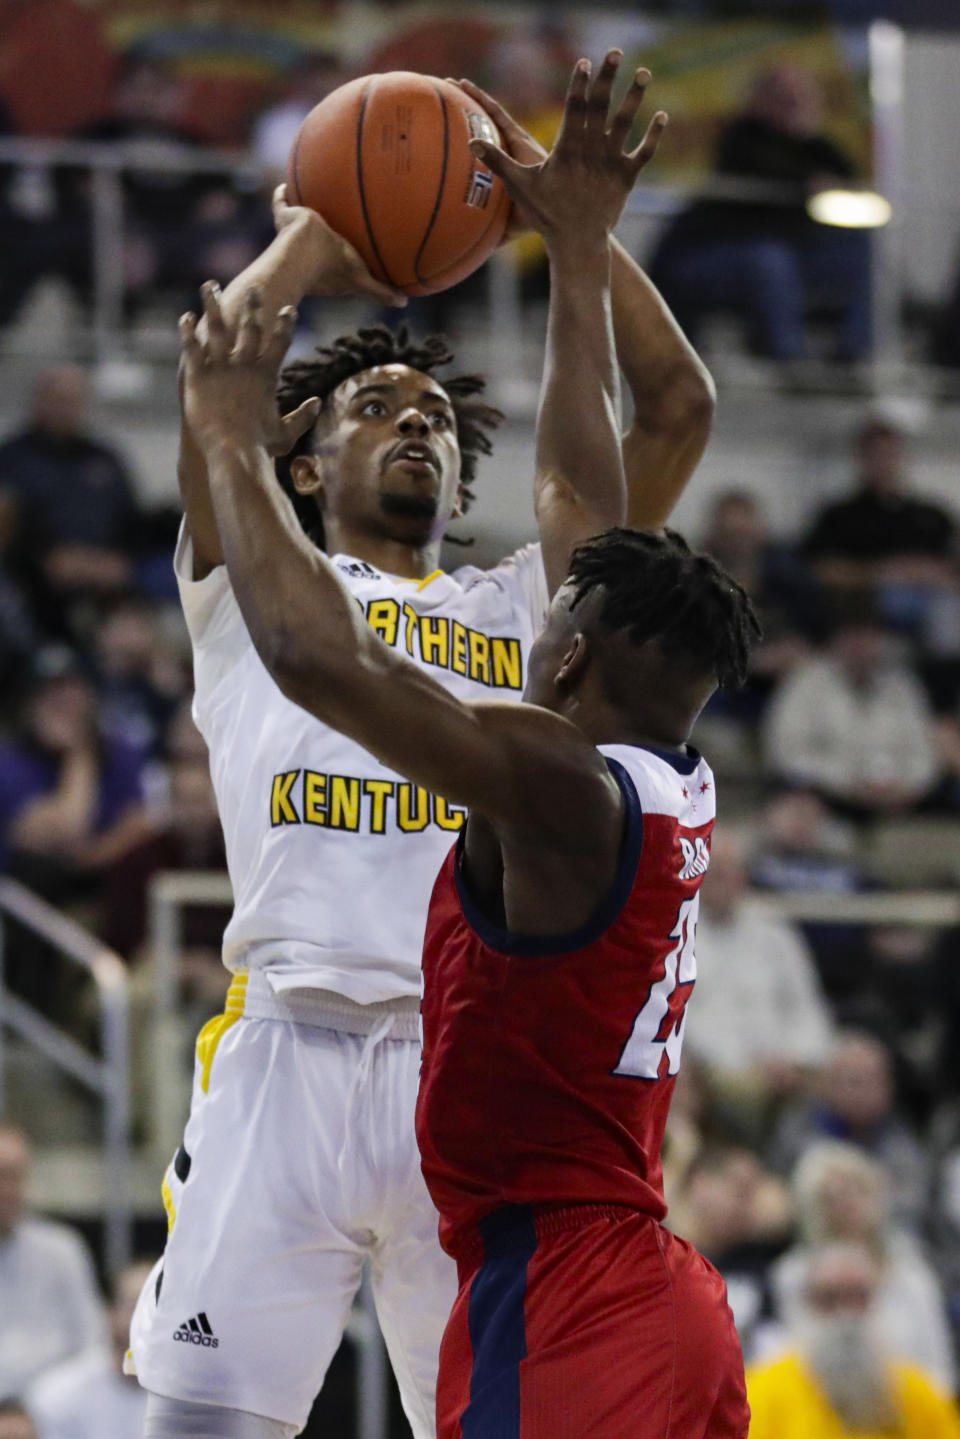 Northern Kentucky guard Jalen Tate (11) shoots over Illinois-Chicago guard Godwin Boahen (25) during the first half of an NCAA college basketball game for the Horizon League men's tournament championship in Indianapolis, Tuesday, March 10, 2020. (AP Photo/Michael Conroy)